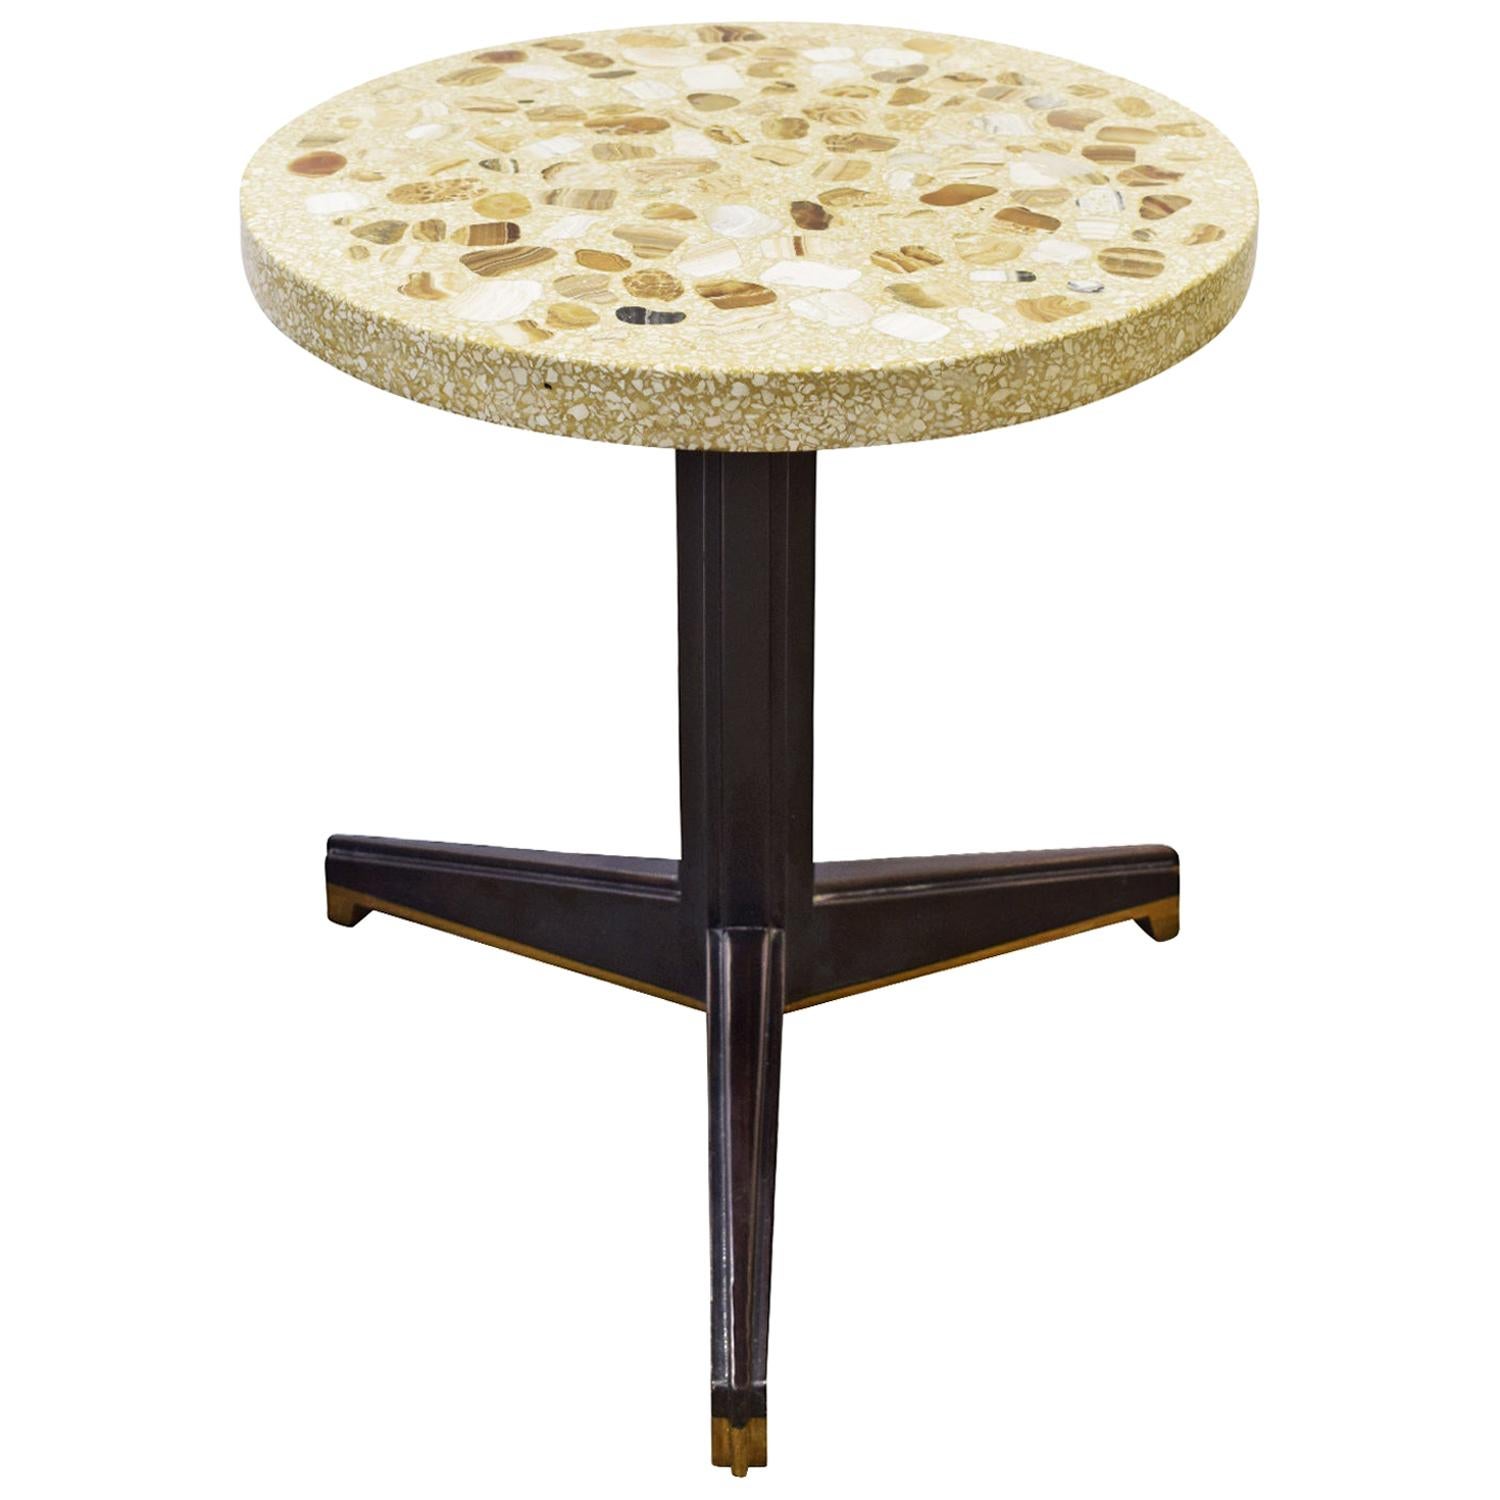 Edward Wormley Rare Occasional Table with Marble Set in Terrazzo 1959 'Signed'